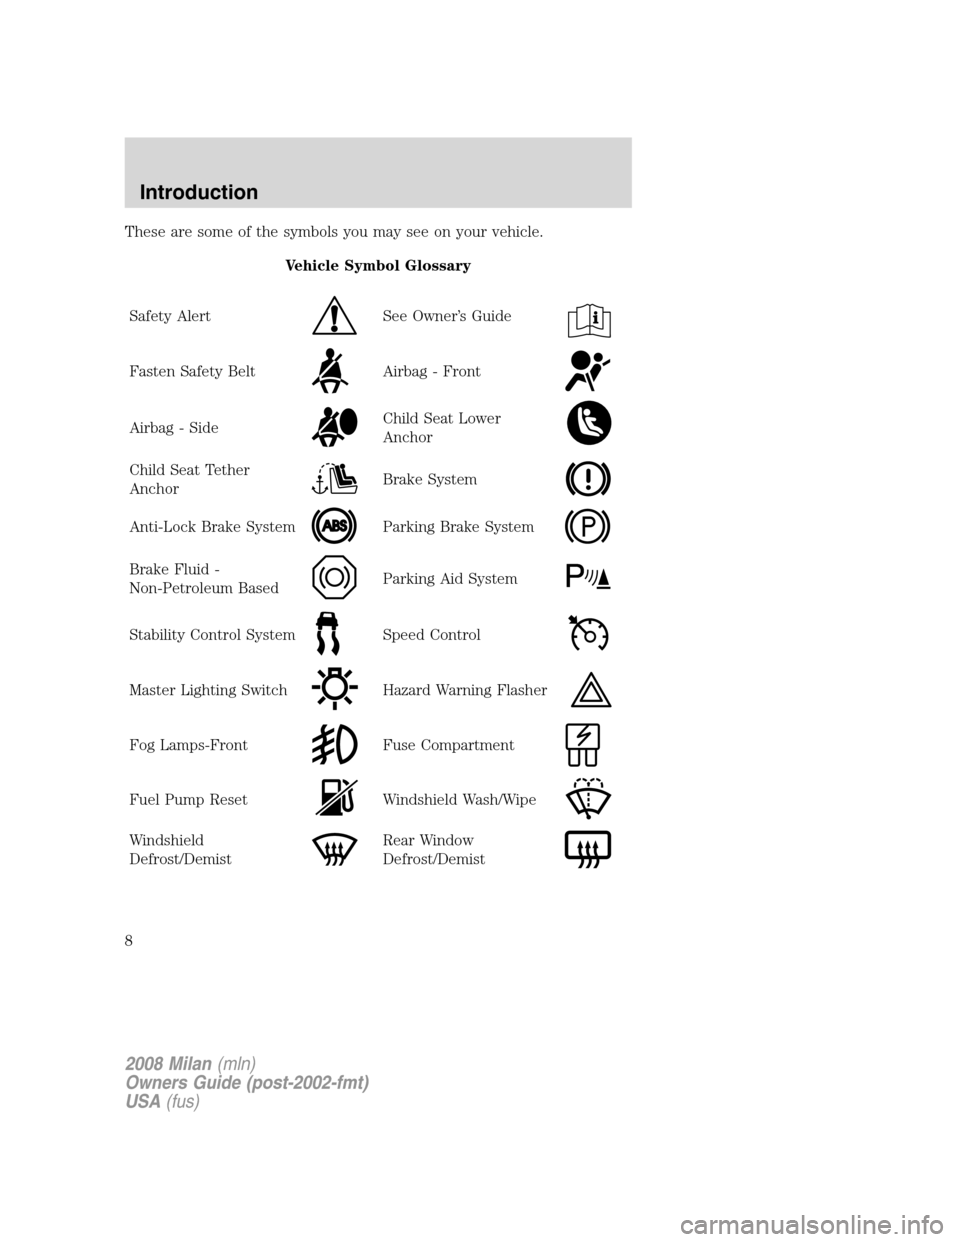 Mercury Milan 2008  Owners Manuals These are some of the symbols you may see on your vehicle.
Vehicle Symbol Glossary
Safety Alert
See Owner’s Guide
Fasten Safety BeltAirbag - Front
Airbag - SideChild Seat Lower
Anchor
Child Seat Tet